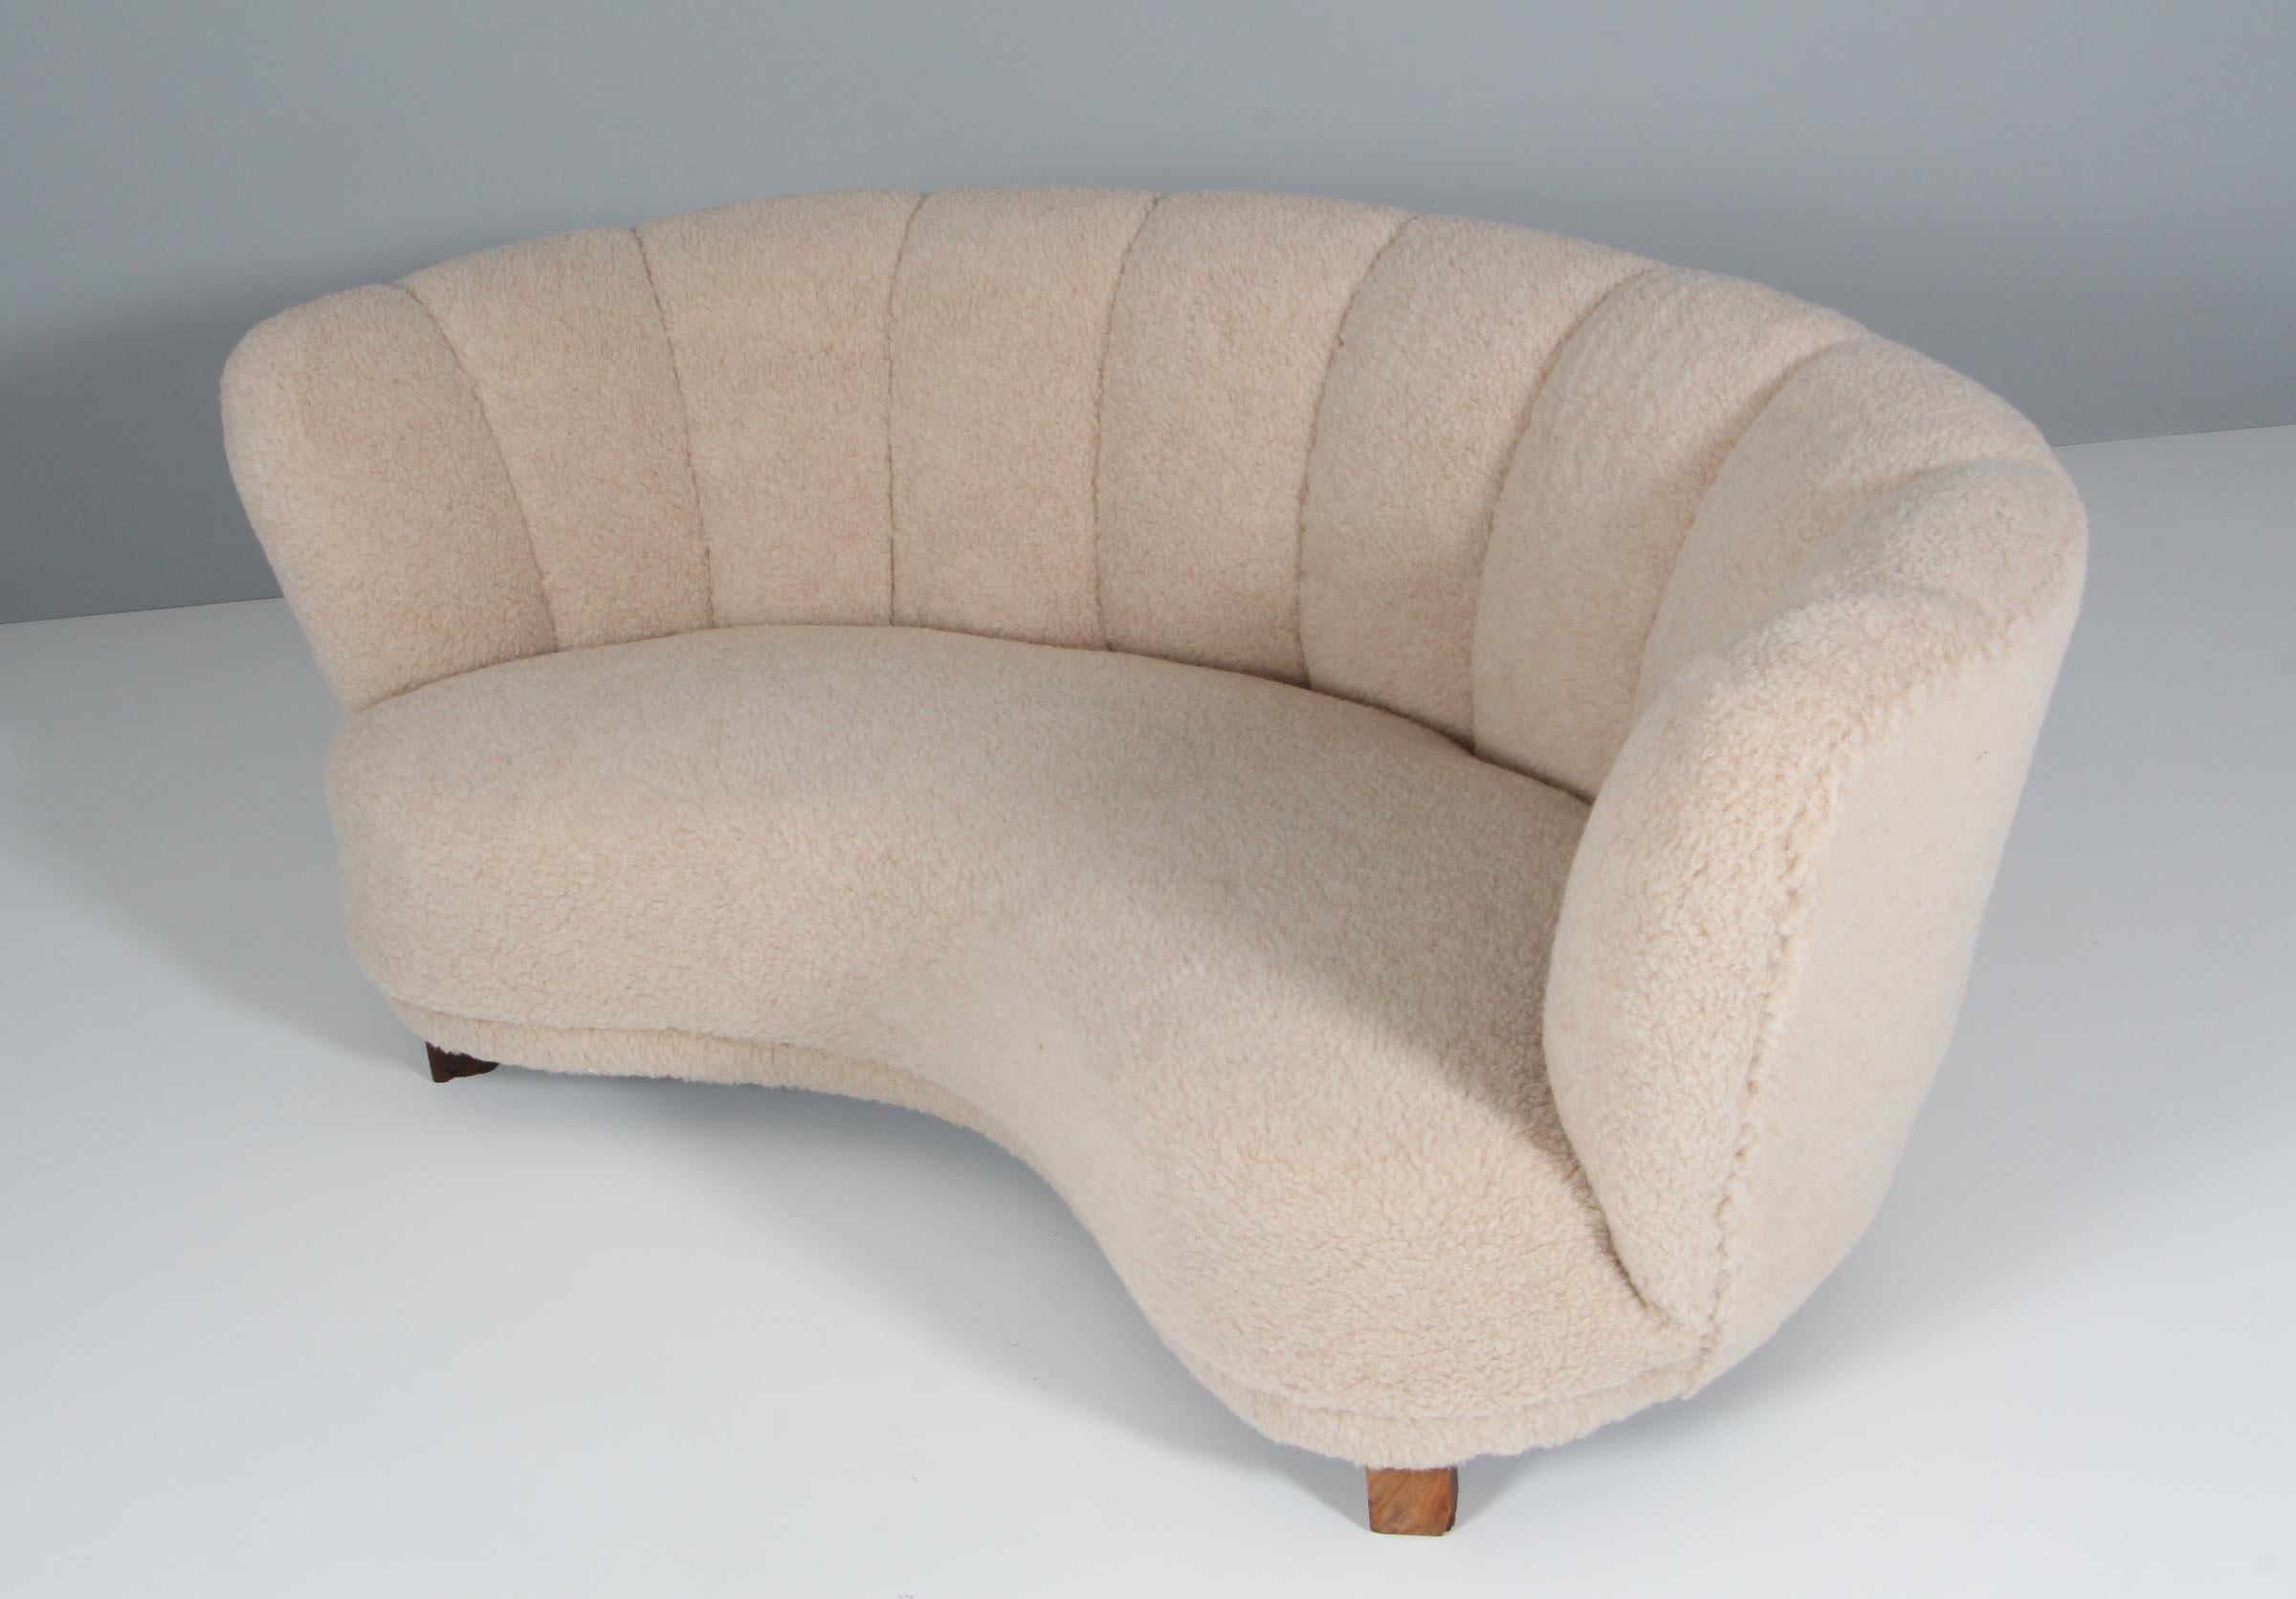 Danish cabinetmaker banana sofa new upholstered with lambwool.

Legs of beech

Made in the 1940s.